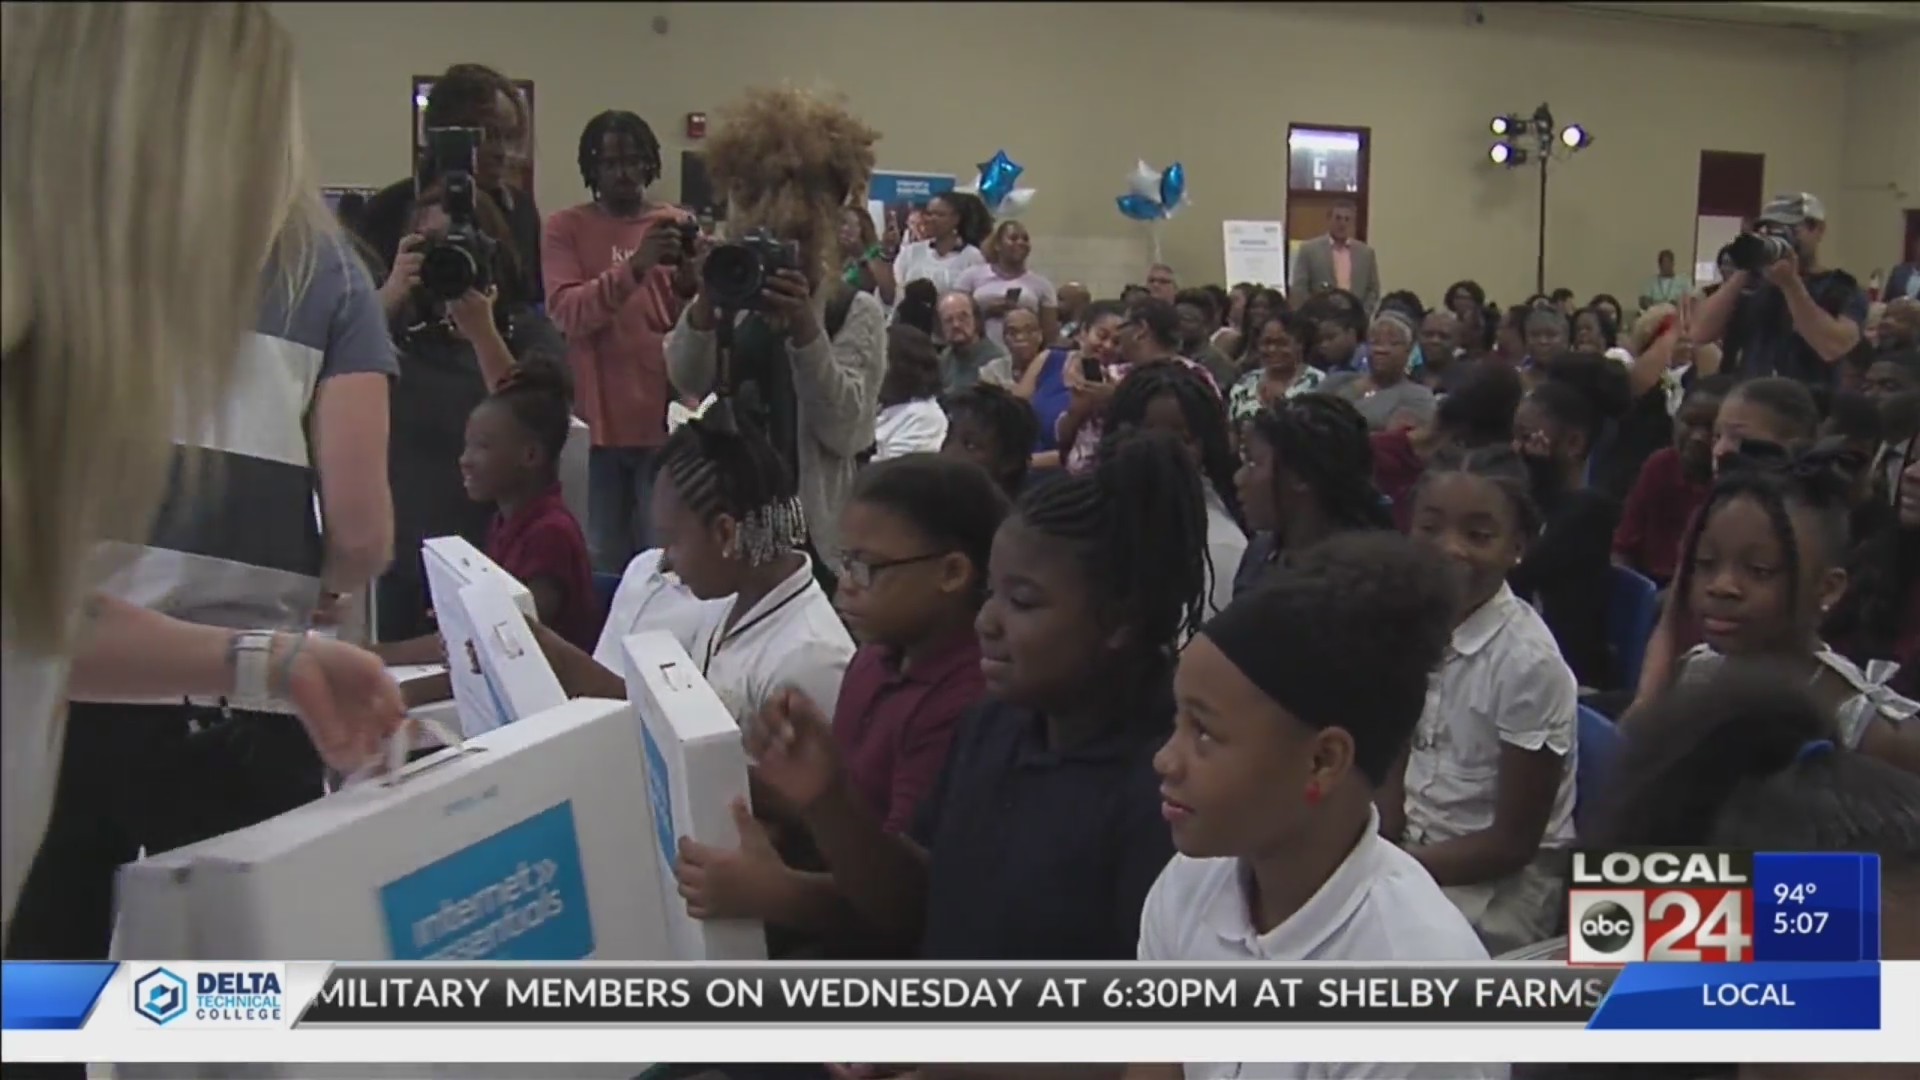 Comcast gives away laptops and internet essentials to local students